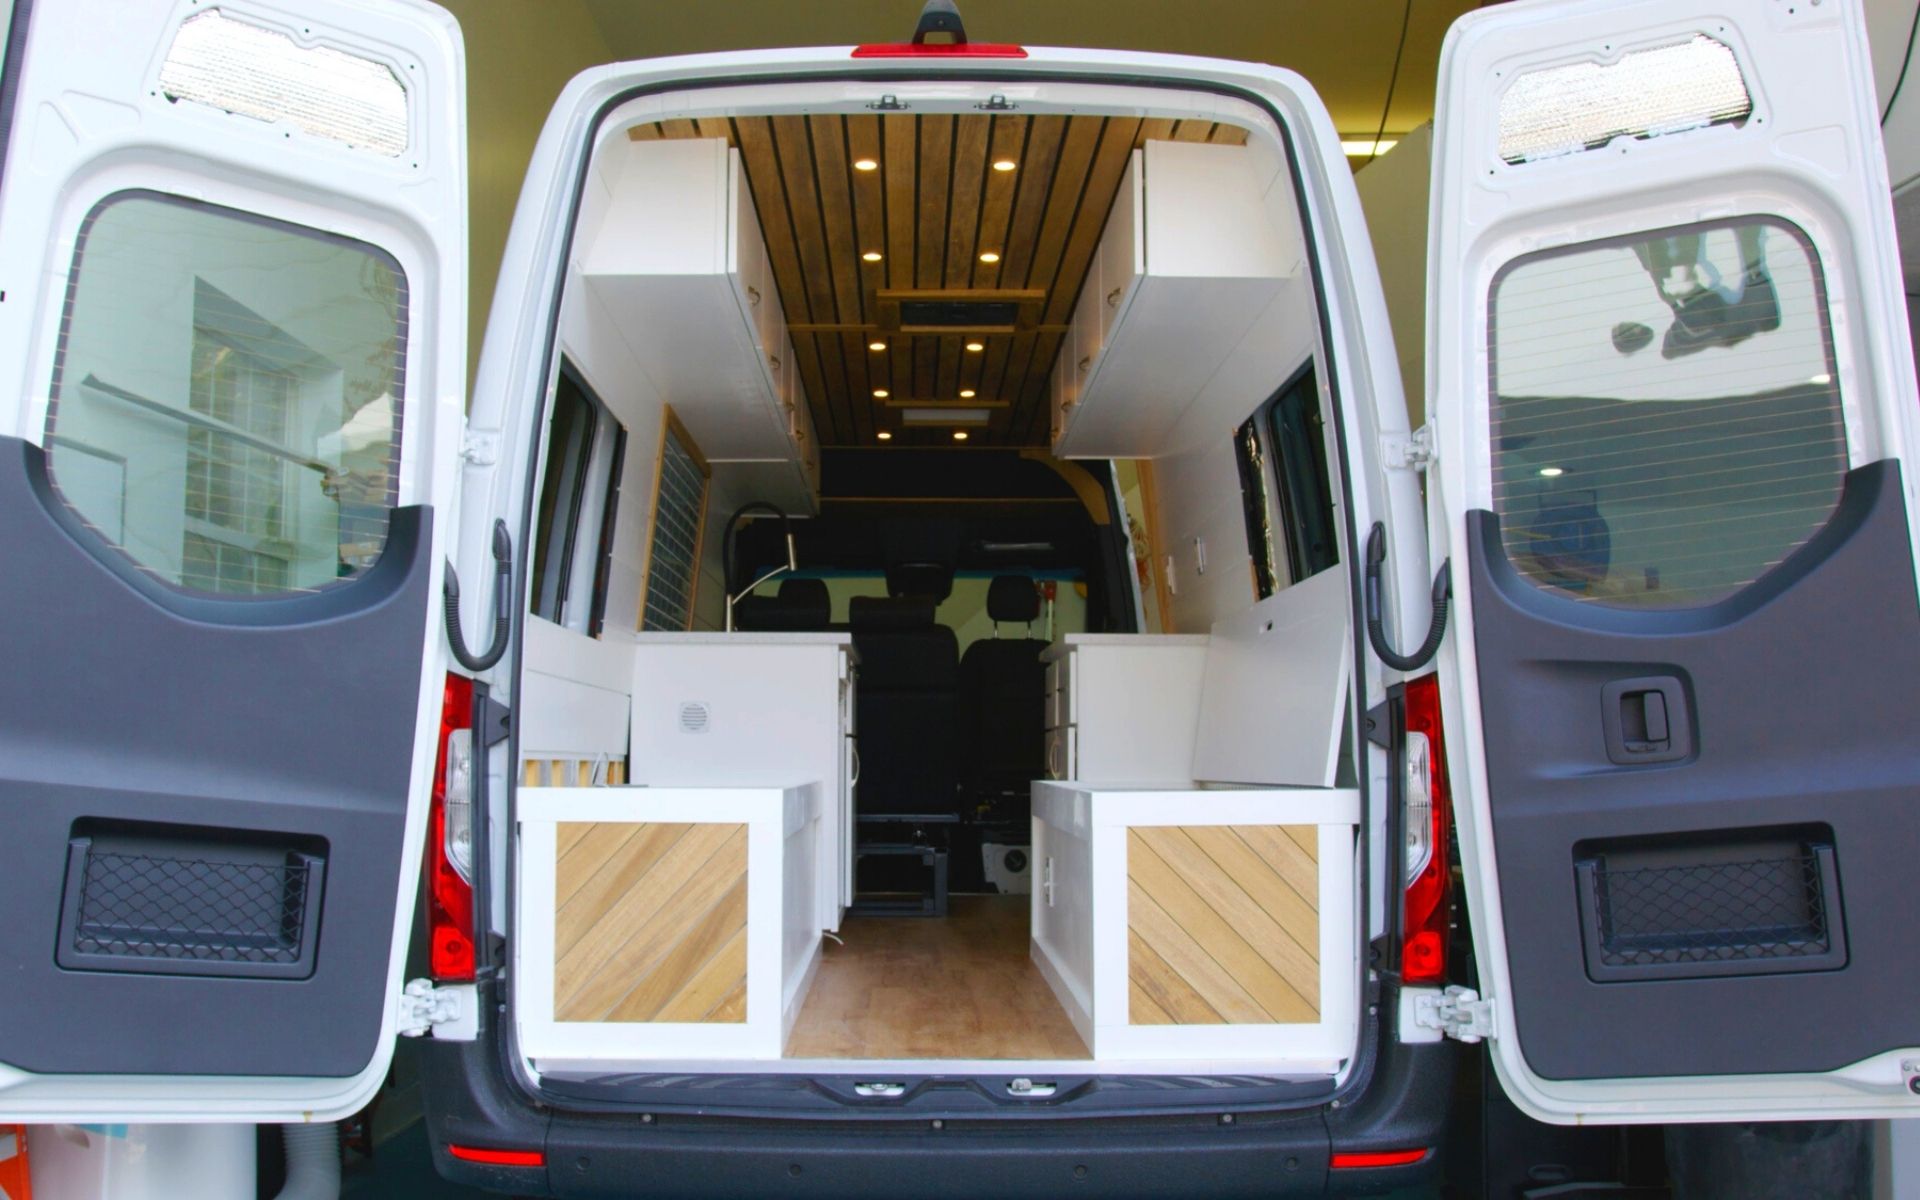 6 Tours of Awesome Camper Van Conversions